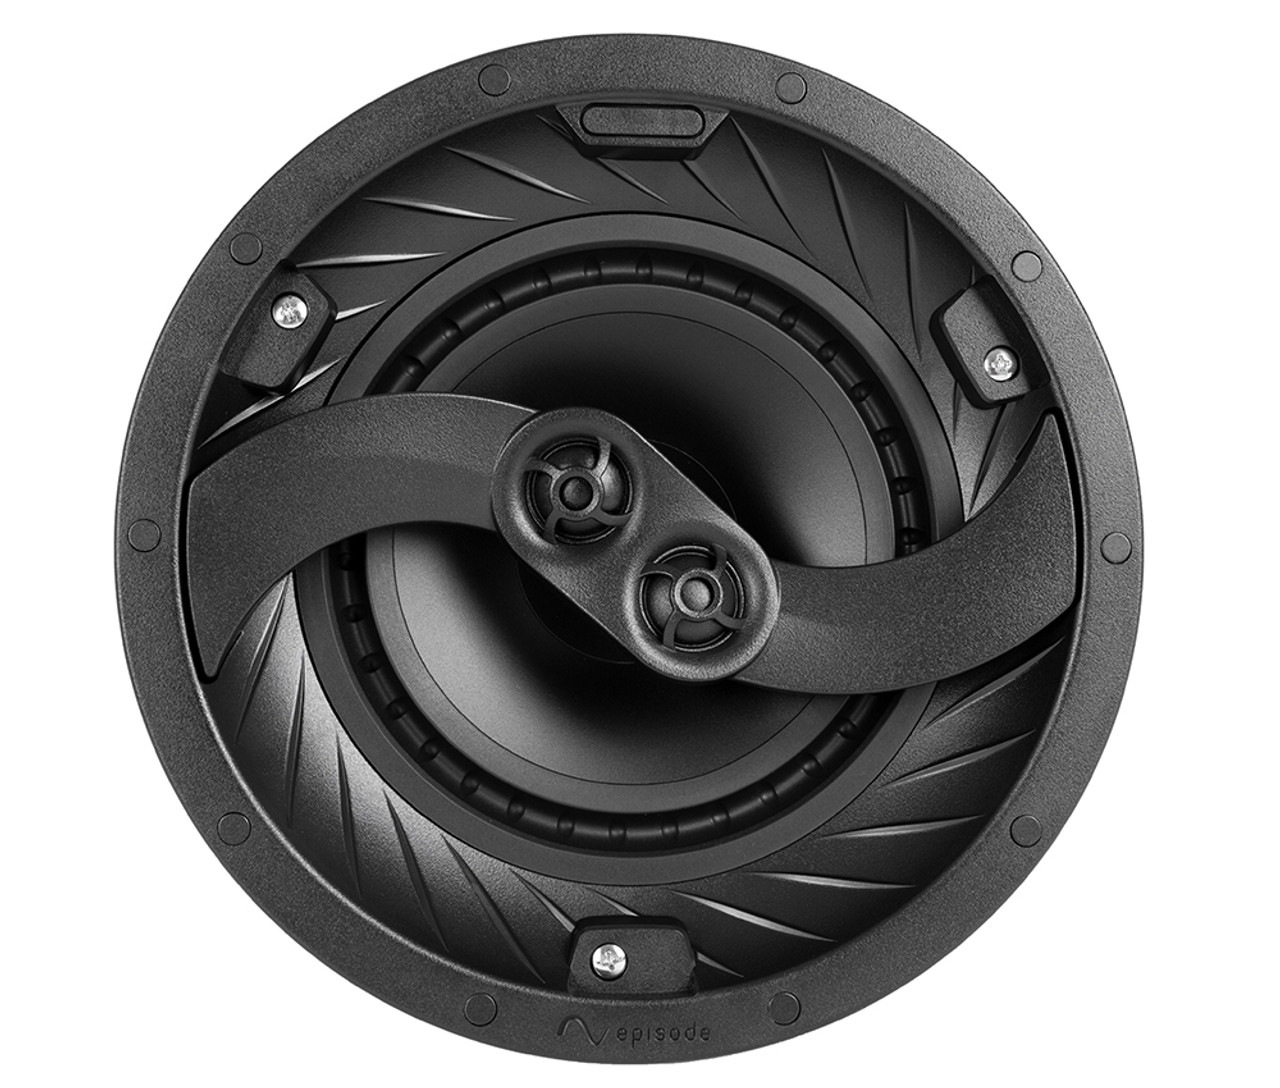 Episode Core 3 Series 6.5" DVC / Surround All Weather In-Ceiling Speaker (Each)